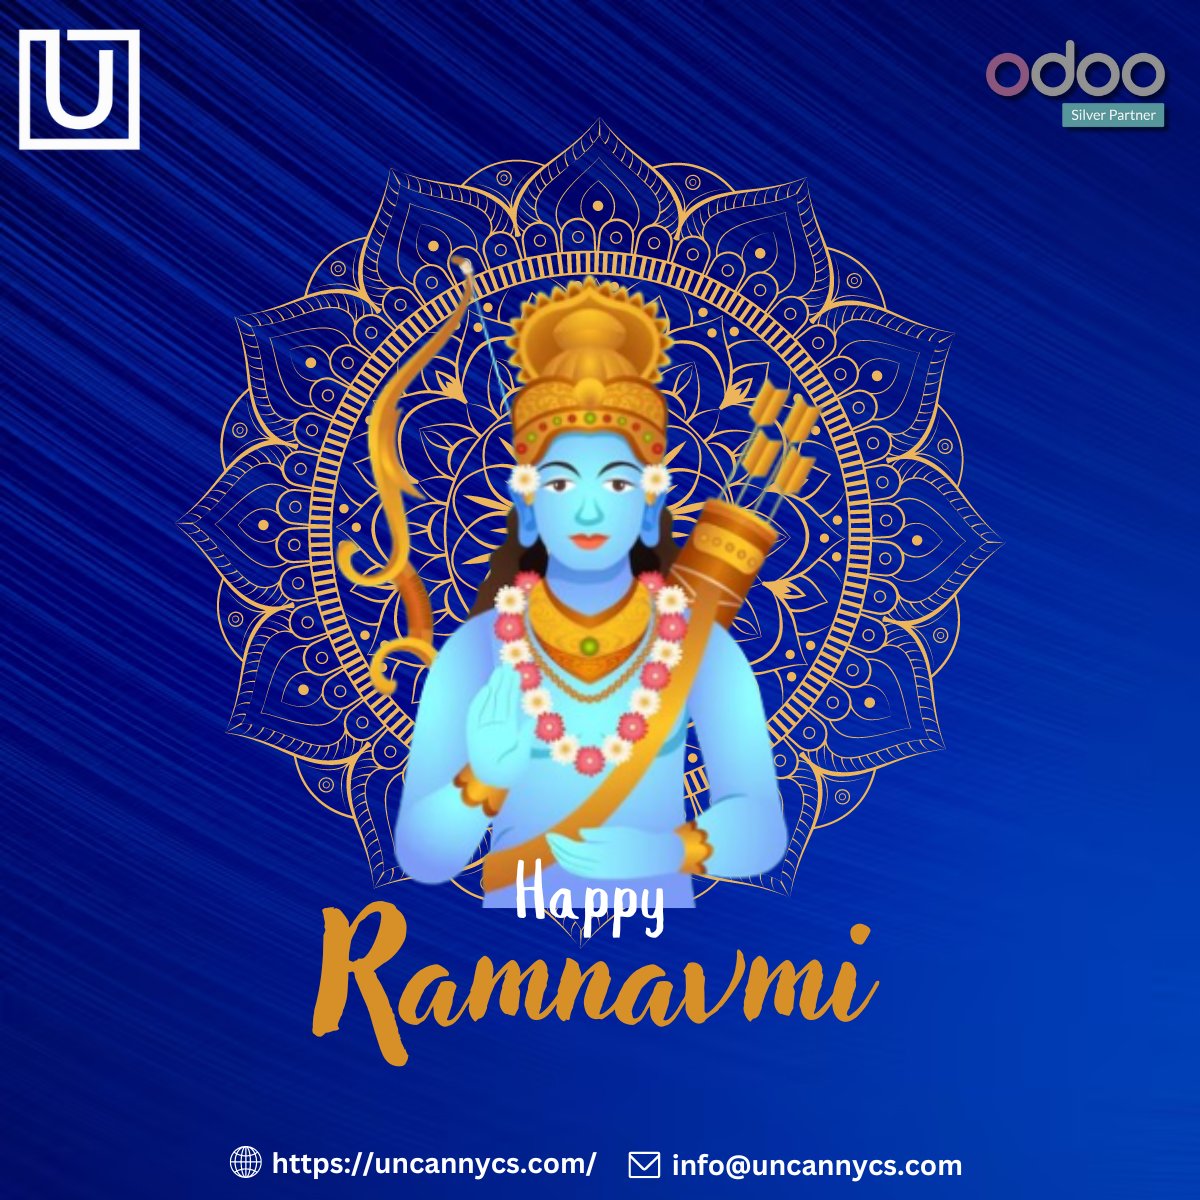 May the divine grace of Lord Ram be always with you. Wish you a very happy and prosperous Rama Navami.

#lordram #DivineGrace #RamaNavami #festivalwishes✨️ #blessings2024 #Prosperity2024 #celebrationtimes #happinessiskey #joyfulmoments #spiritualjourney💫